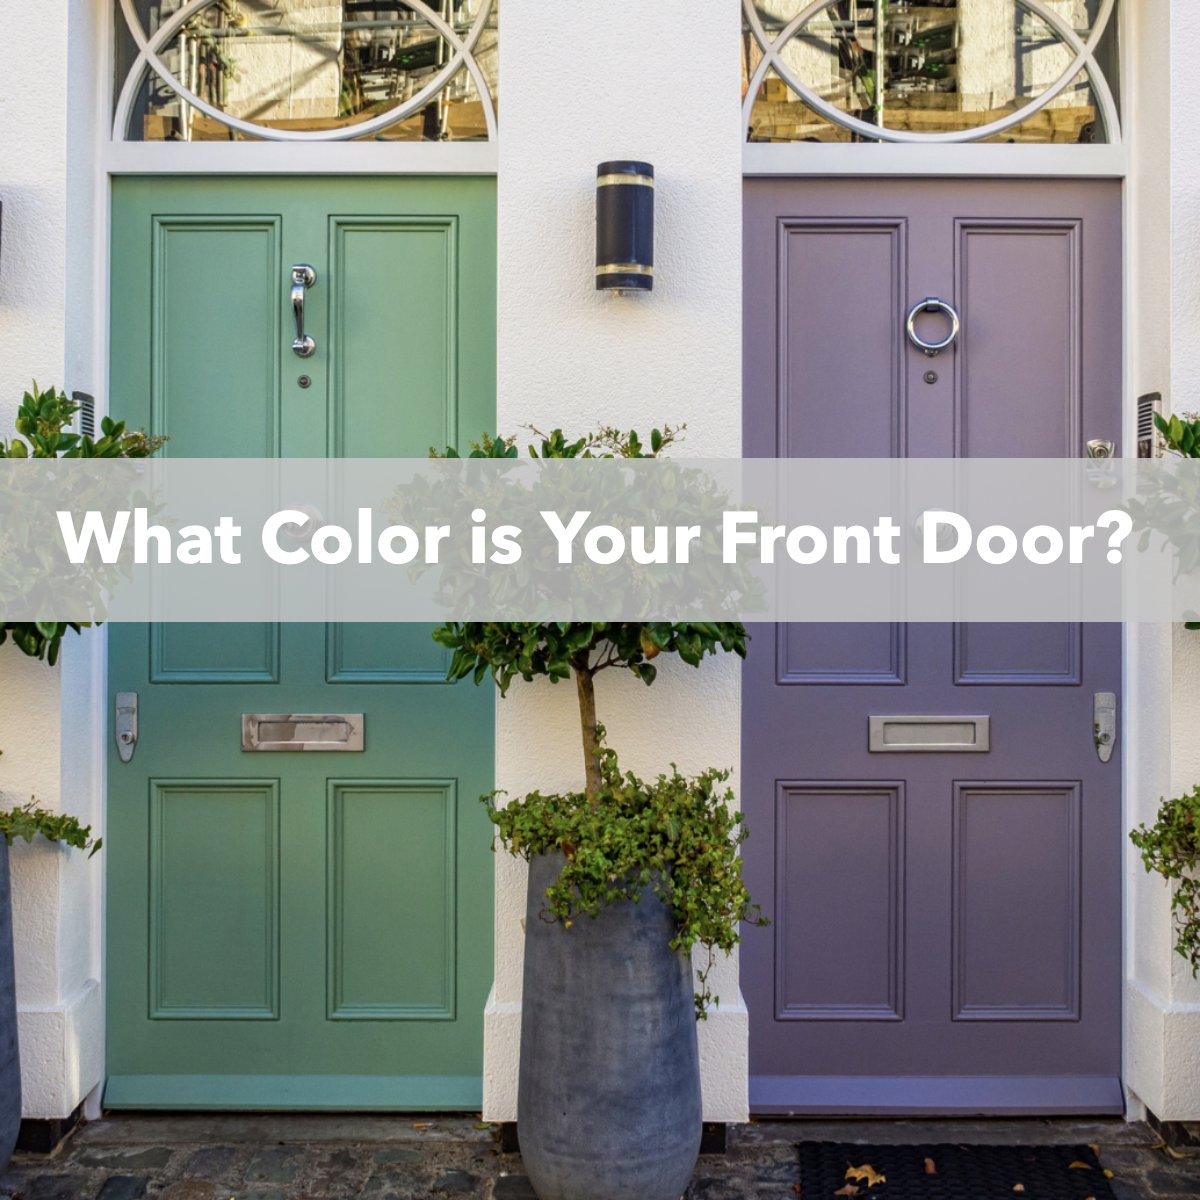 Did you select the color or did you just settle? 🤔

Tell us in the comments! 👇 

#questions    #frontdoor    #doorcolor    #exterior    #realestate
#sellbuybryett #realtor #realestate #realestateagent #realtorforlife #home #househunting #forsale #dreamhome